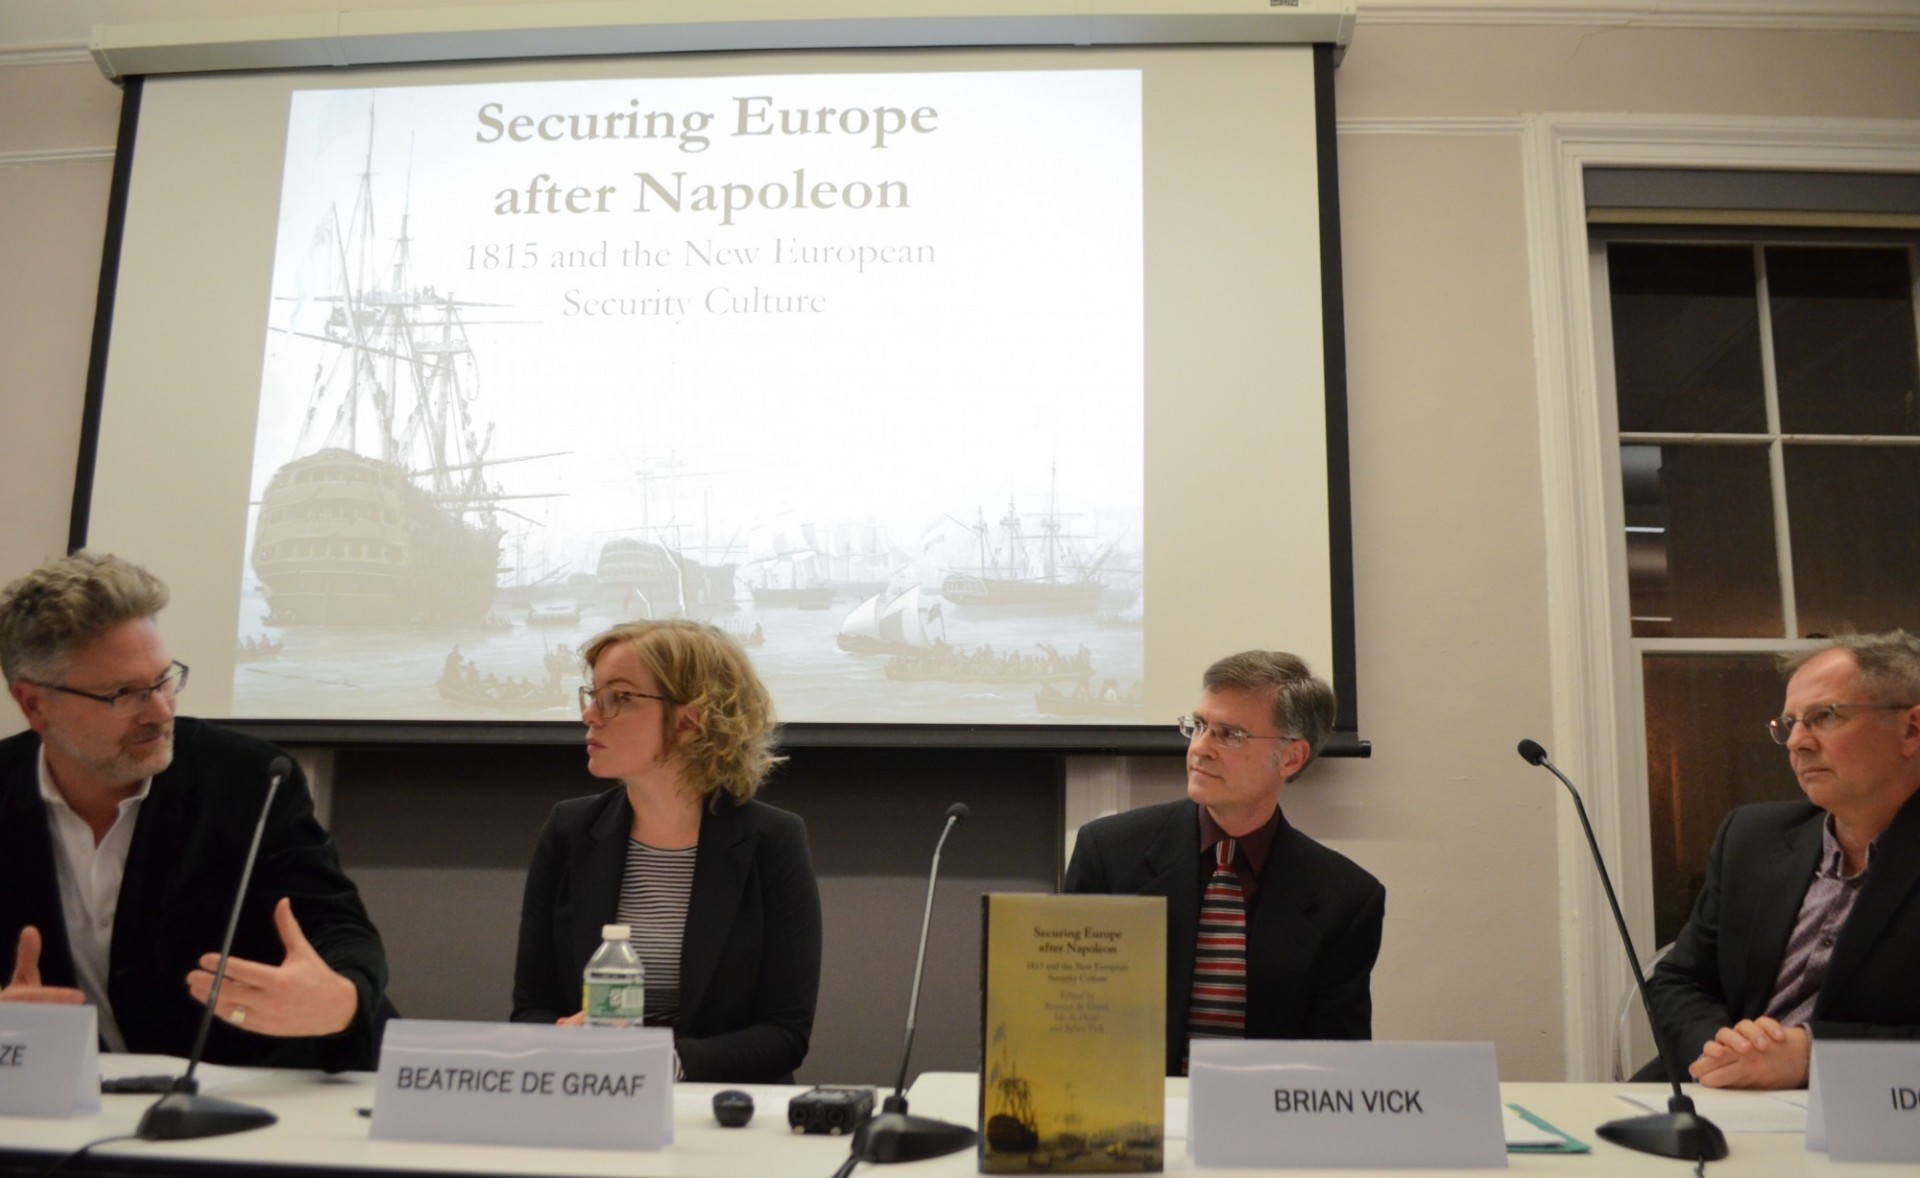 Securing Europe after Napoleon - 1815 and the New European Security Culture